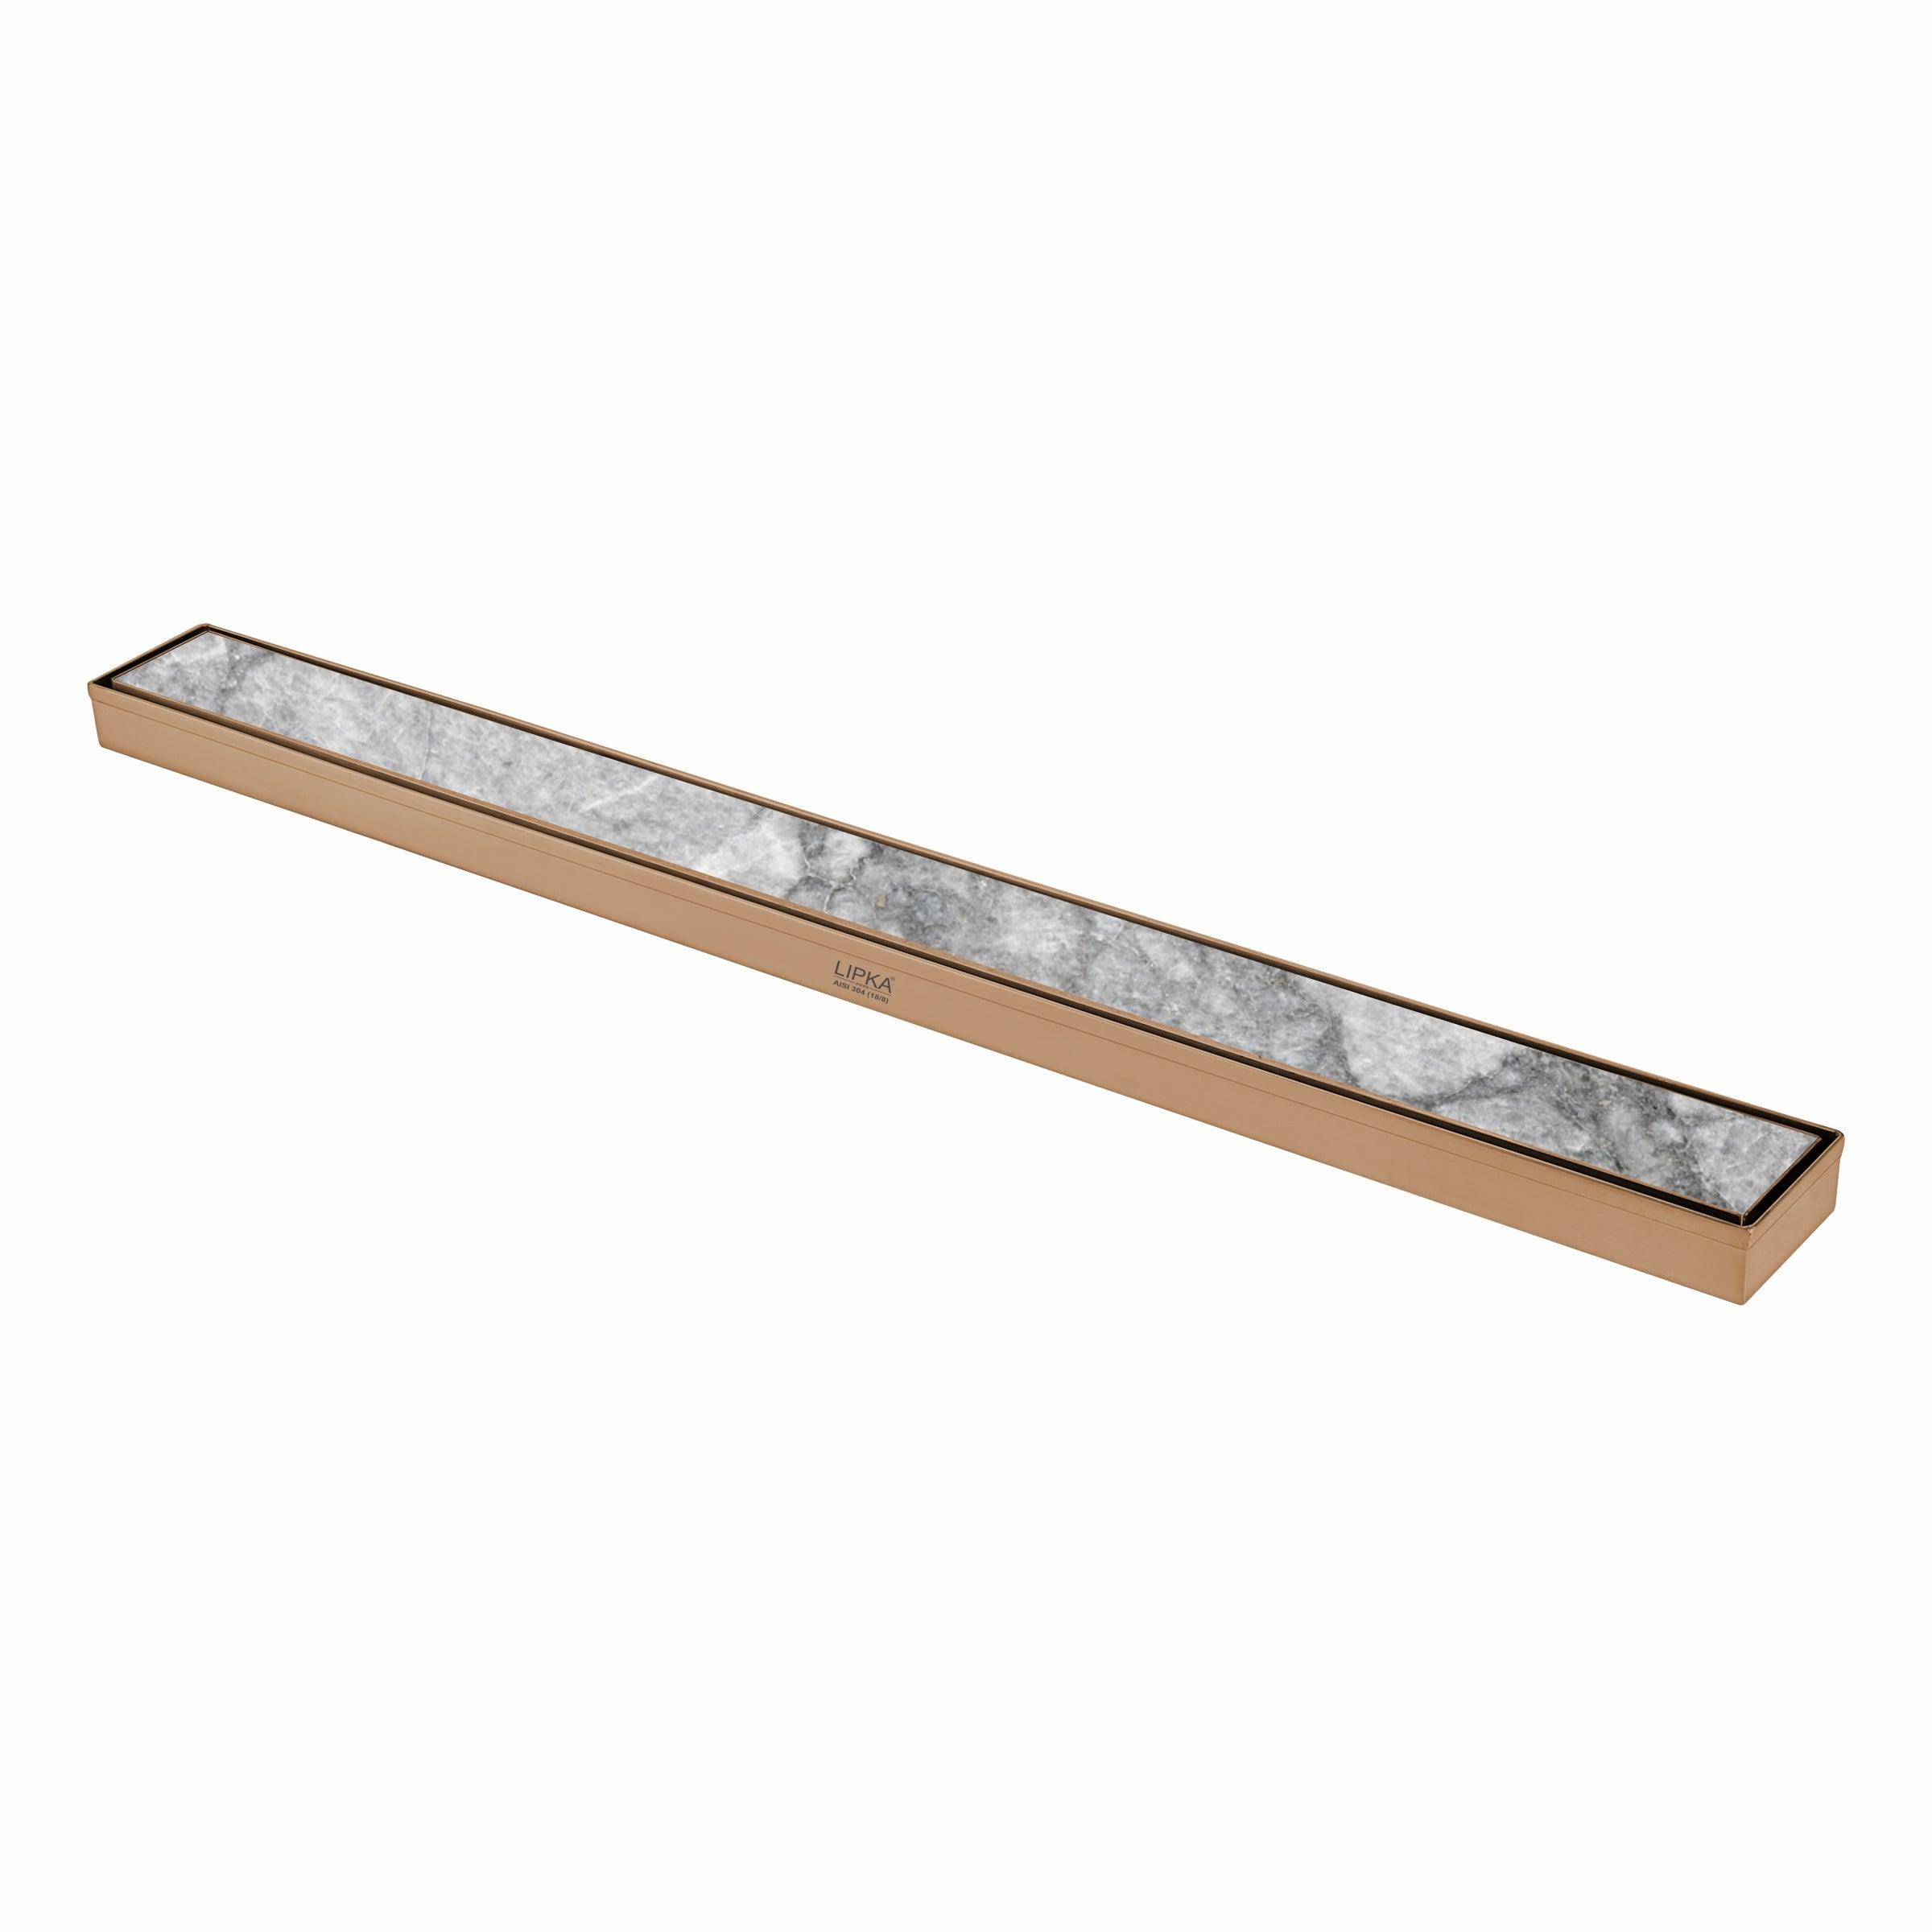 Marble Insert Shower Drain Channel - Antique Copper (32 x 2 Inches)